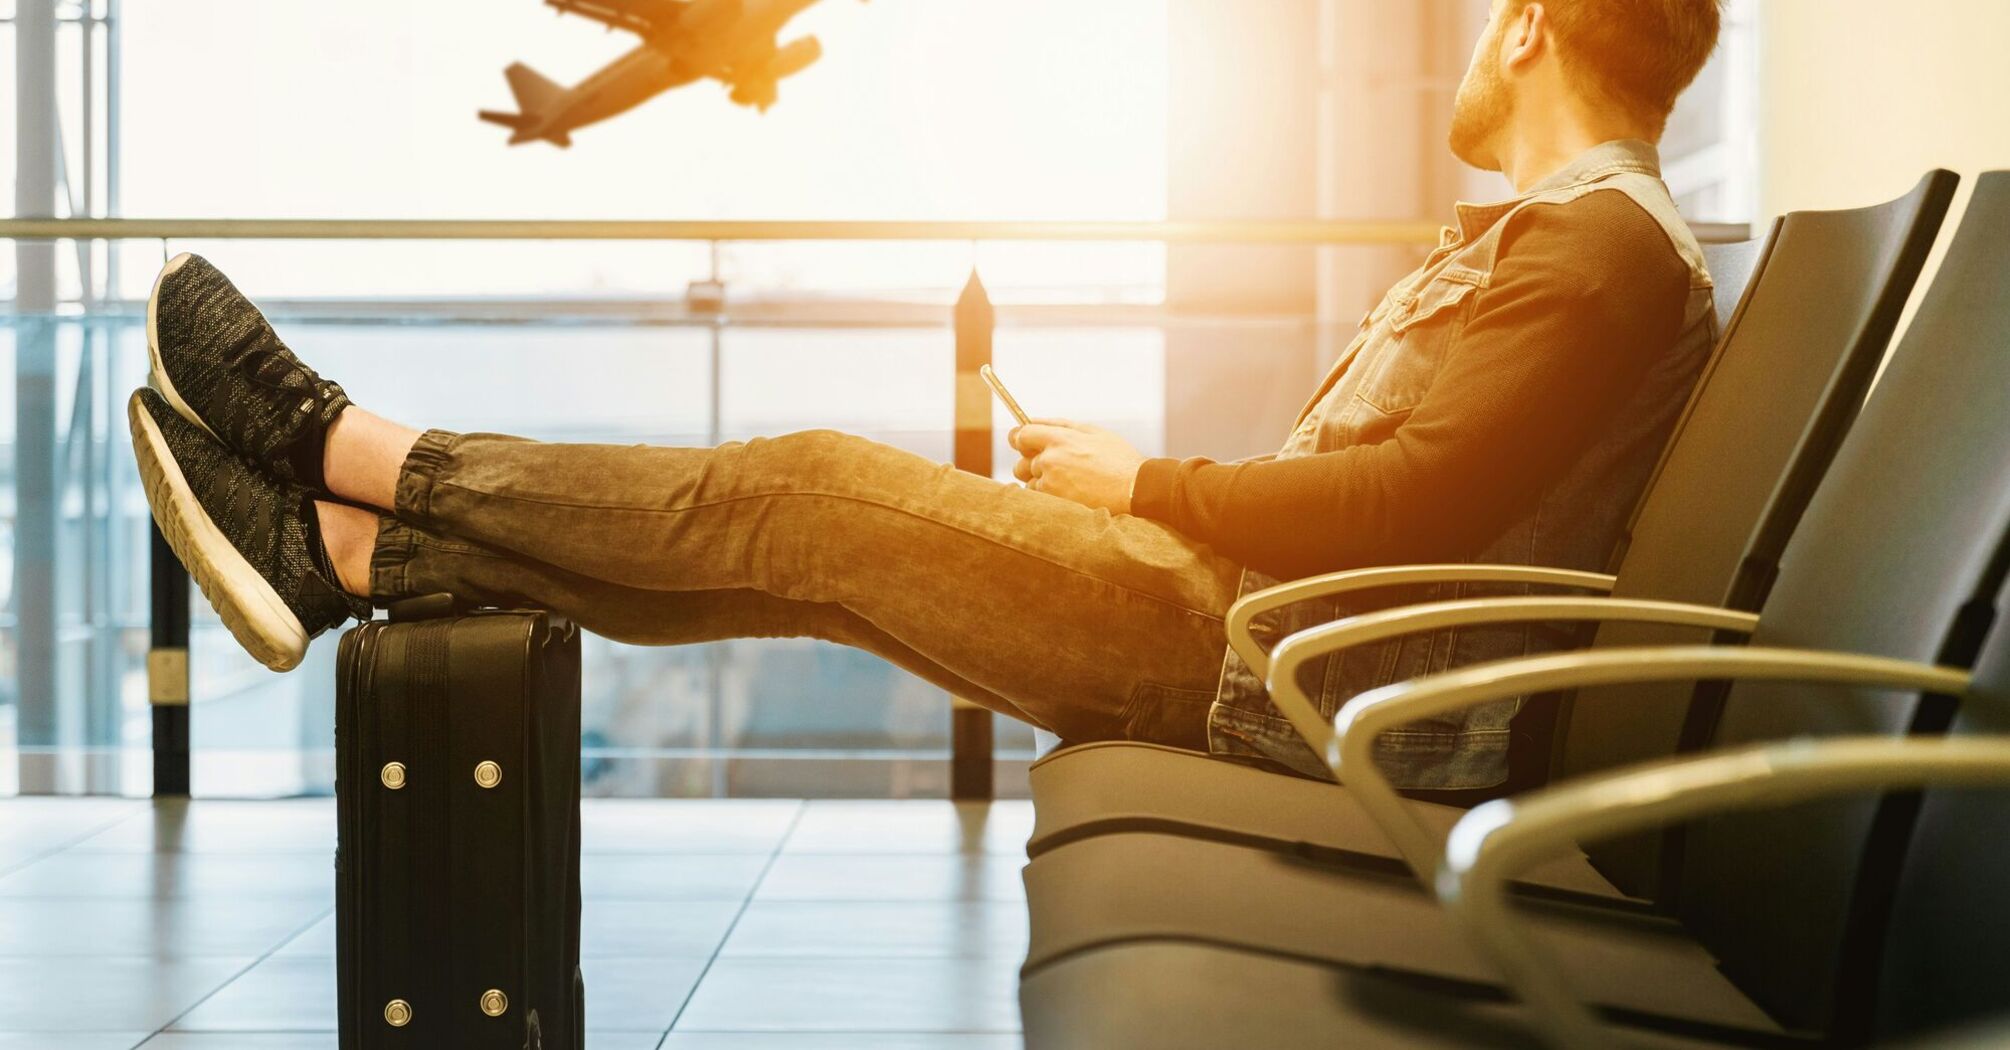 Man sitting on gang chair with feet on luggage looking at airplane